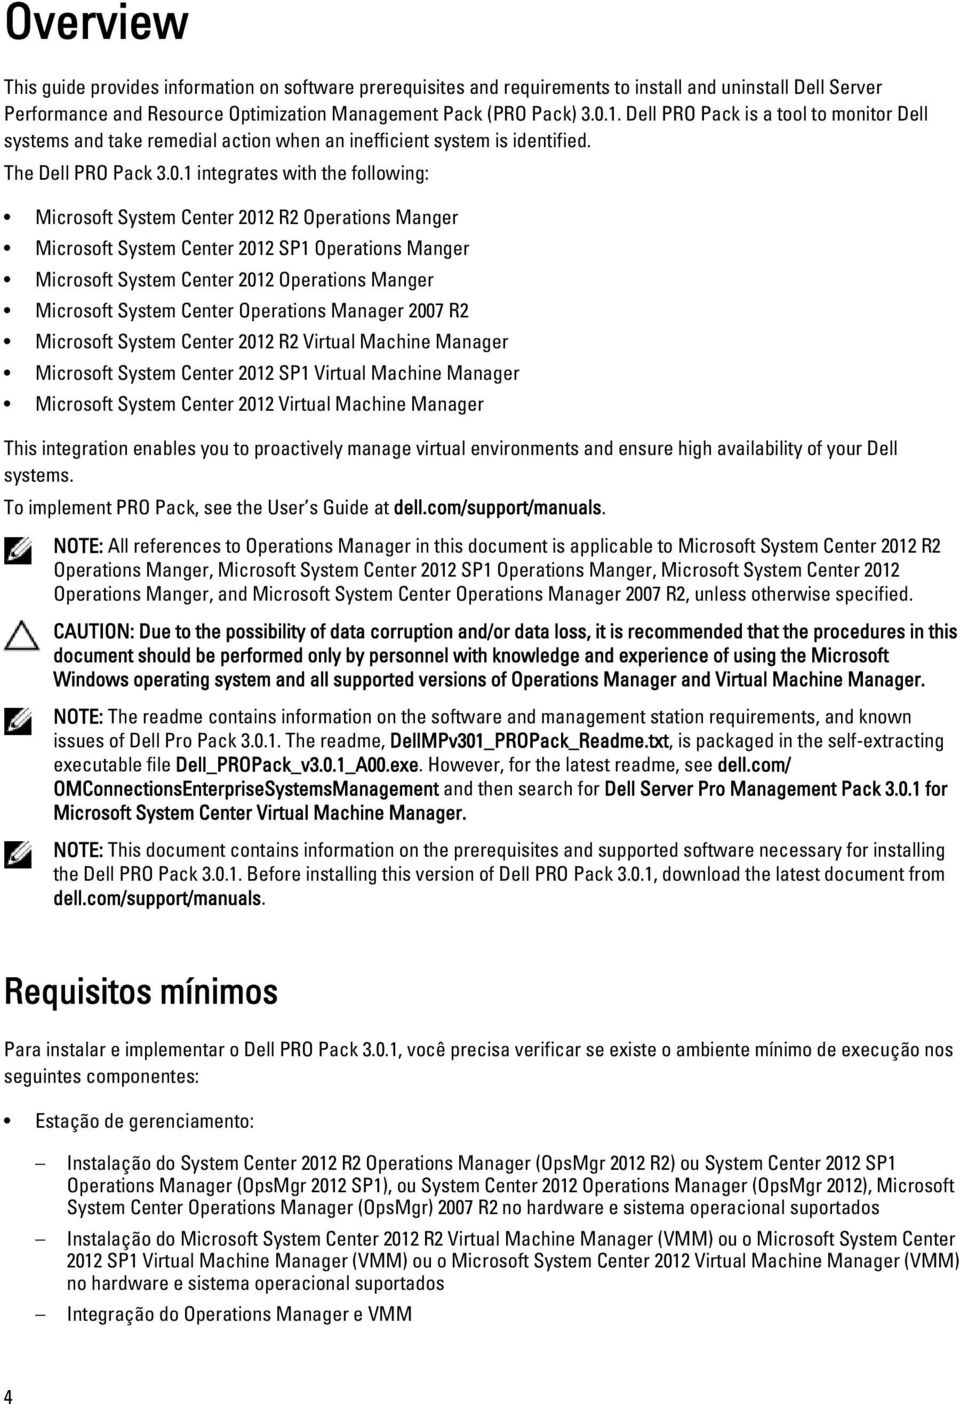 1 integrates with the following: Microsoft System Center 2012 R2 Operations Manger Microsoft System Center 2012 SP1 Operations Manger Microsoft System Center 2012 Operations Manger Microsoft System